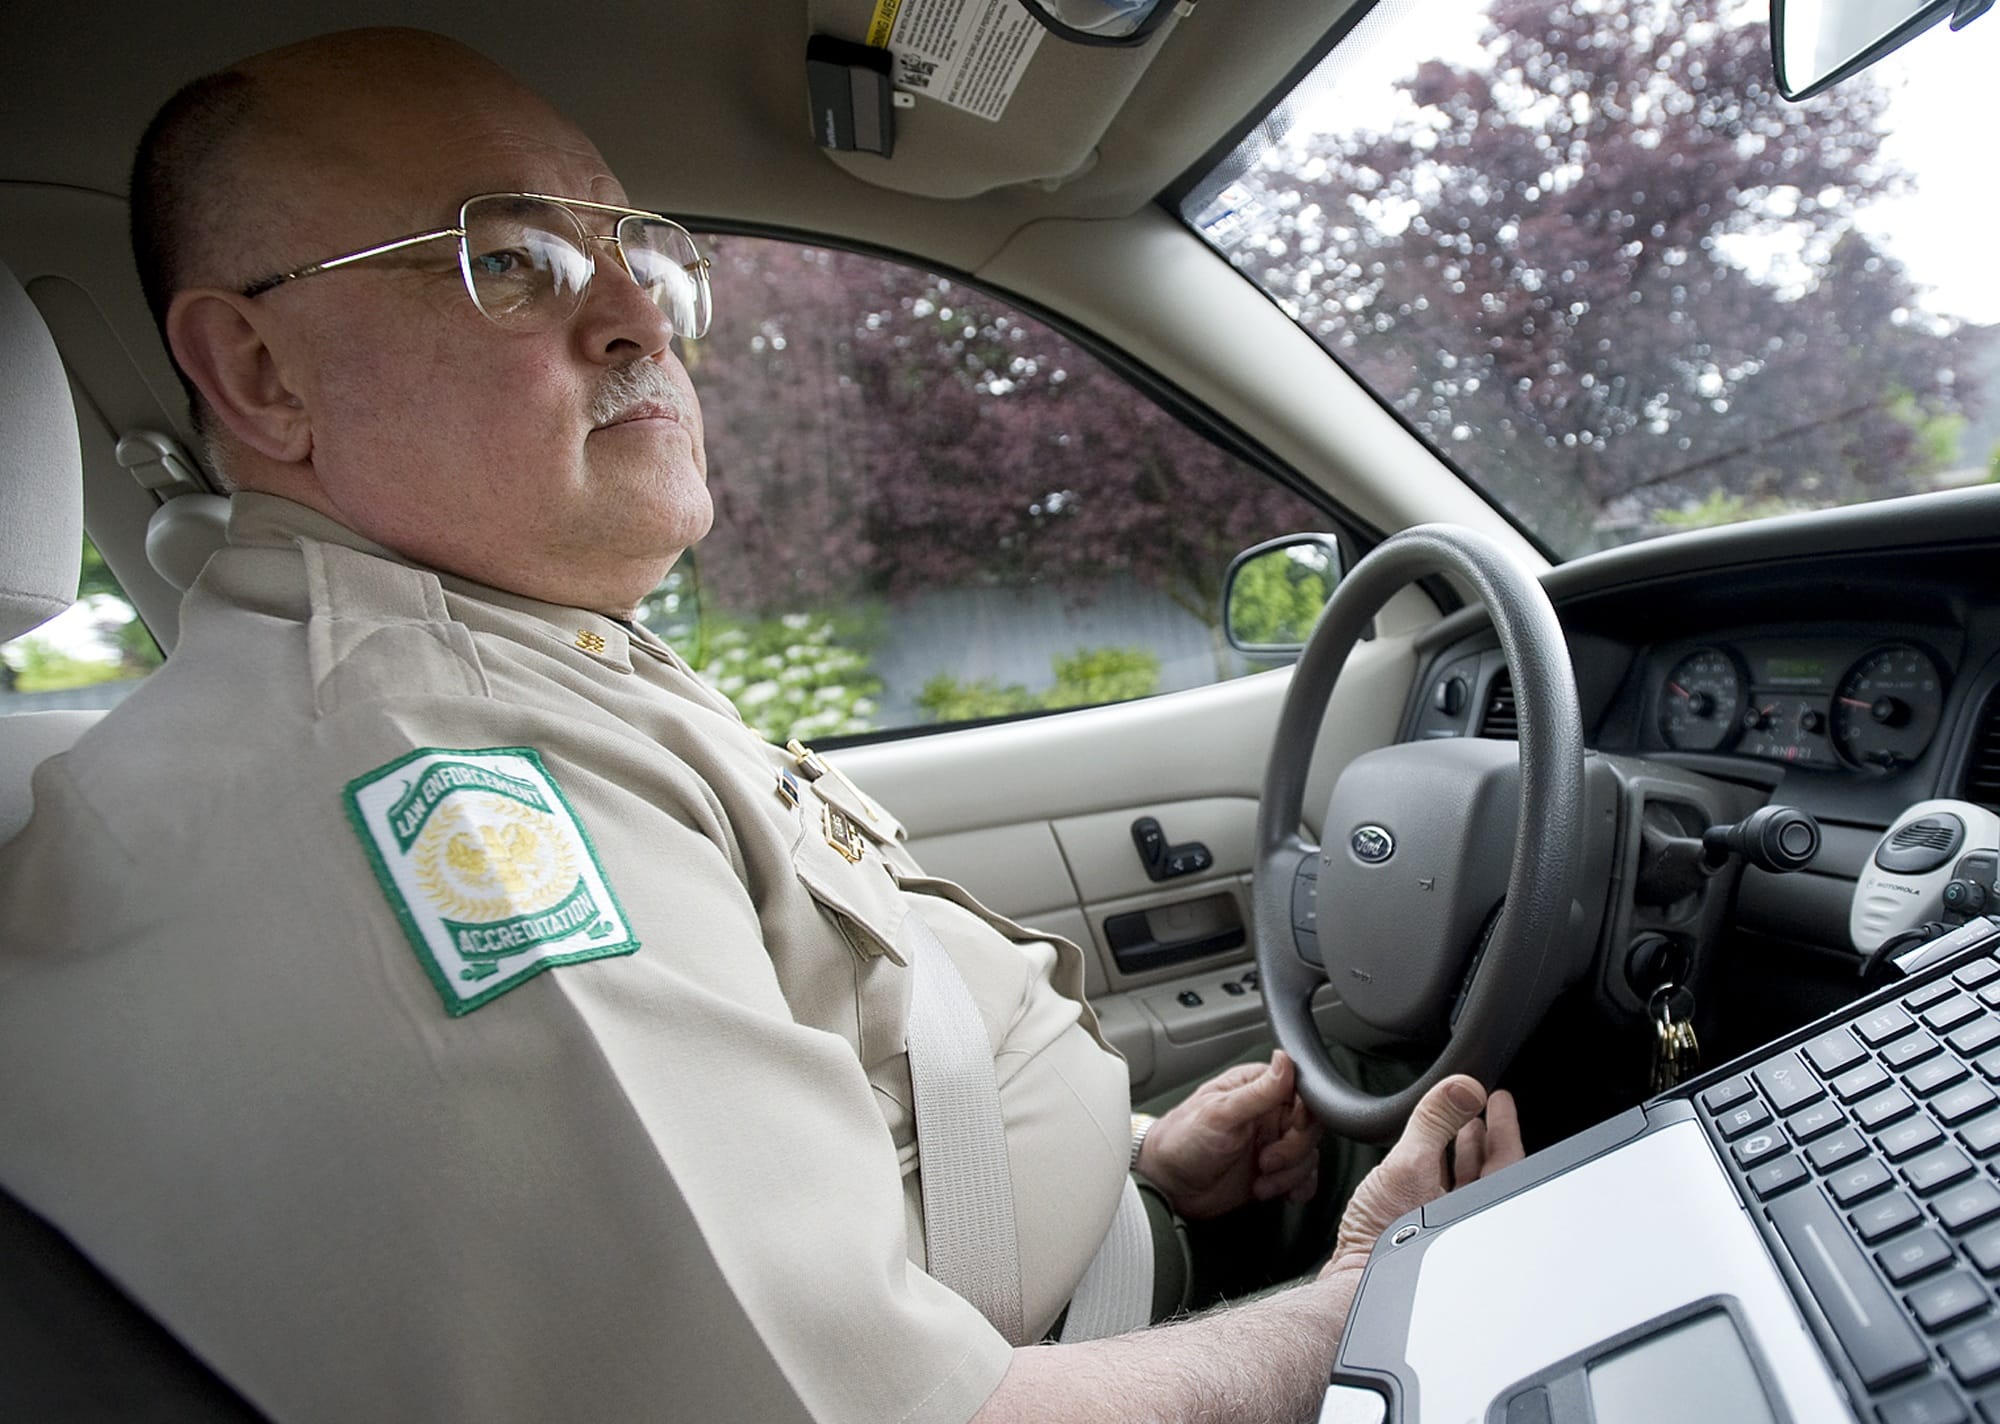 Sheriff Garry Lucas patrols the streets of Clark County in 2011.